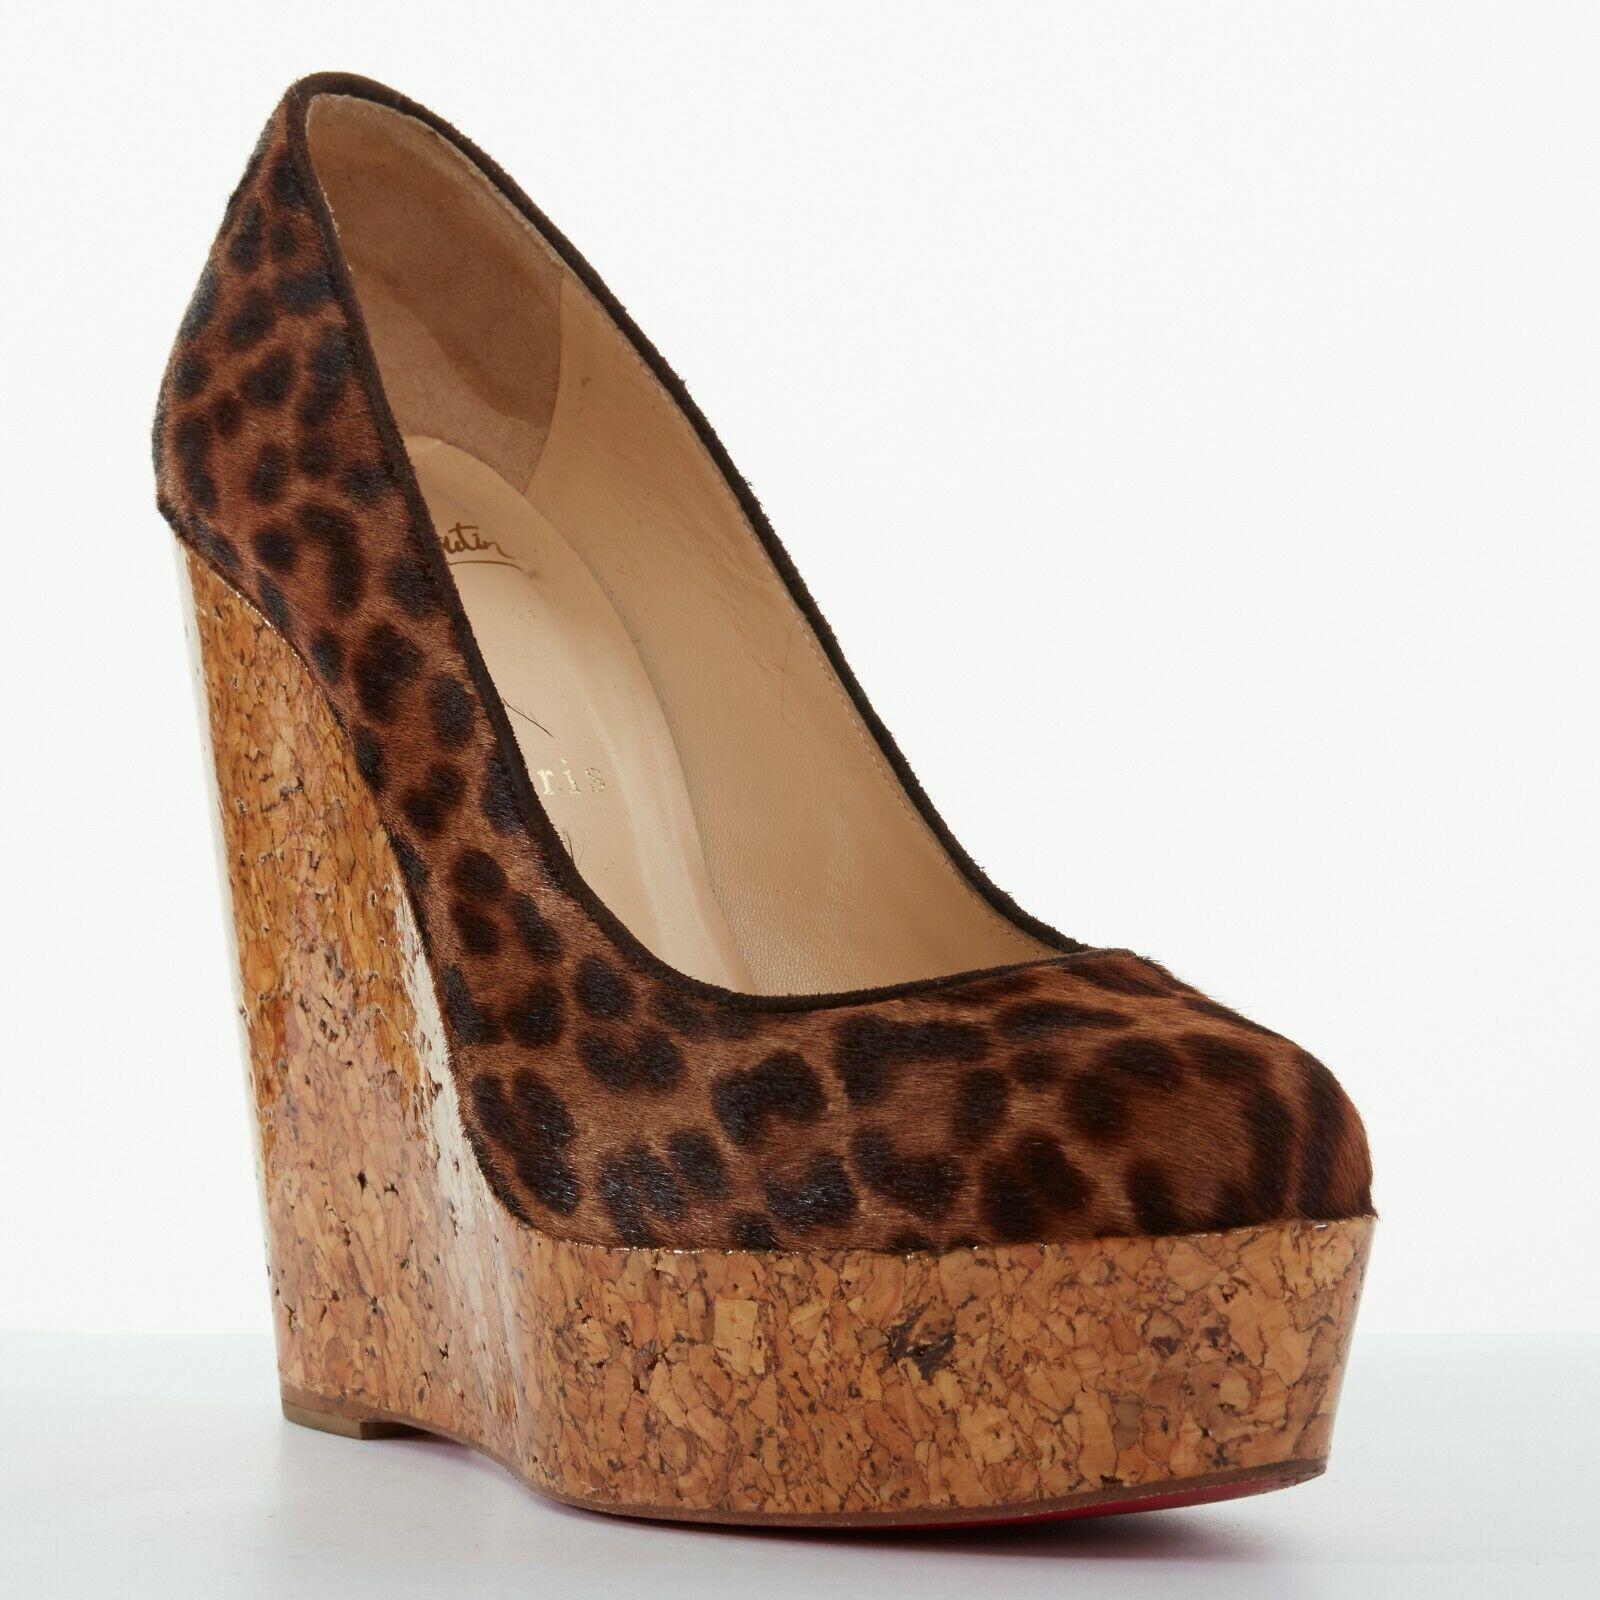 CHRISTIAN LOUBOUTIN Coroclic 140 leopard calf glossy cork wedge heels EU37.5
CHRISTIAN LOUBOUTIN
Coroclic 140. Brown leopard print calf leather upper. Dark brown suede trimming along opening. 
Almond round toe. Gloss lacquared cork wedge heel.